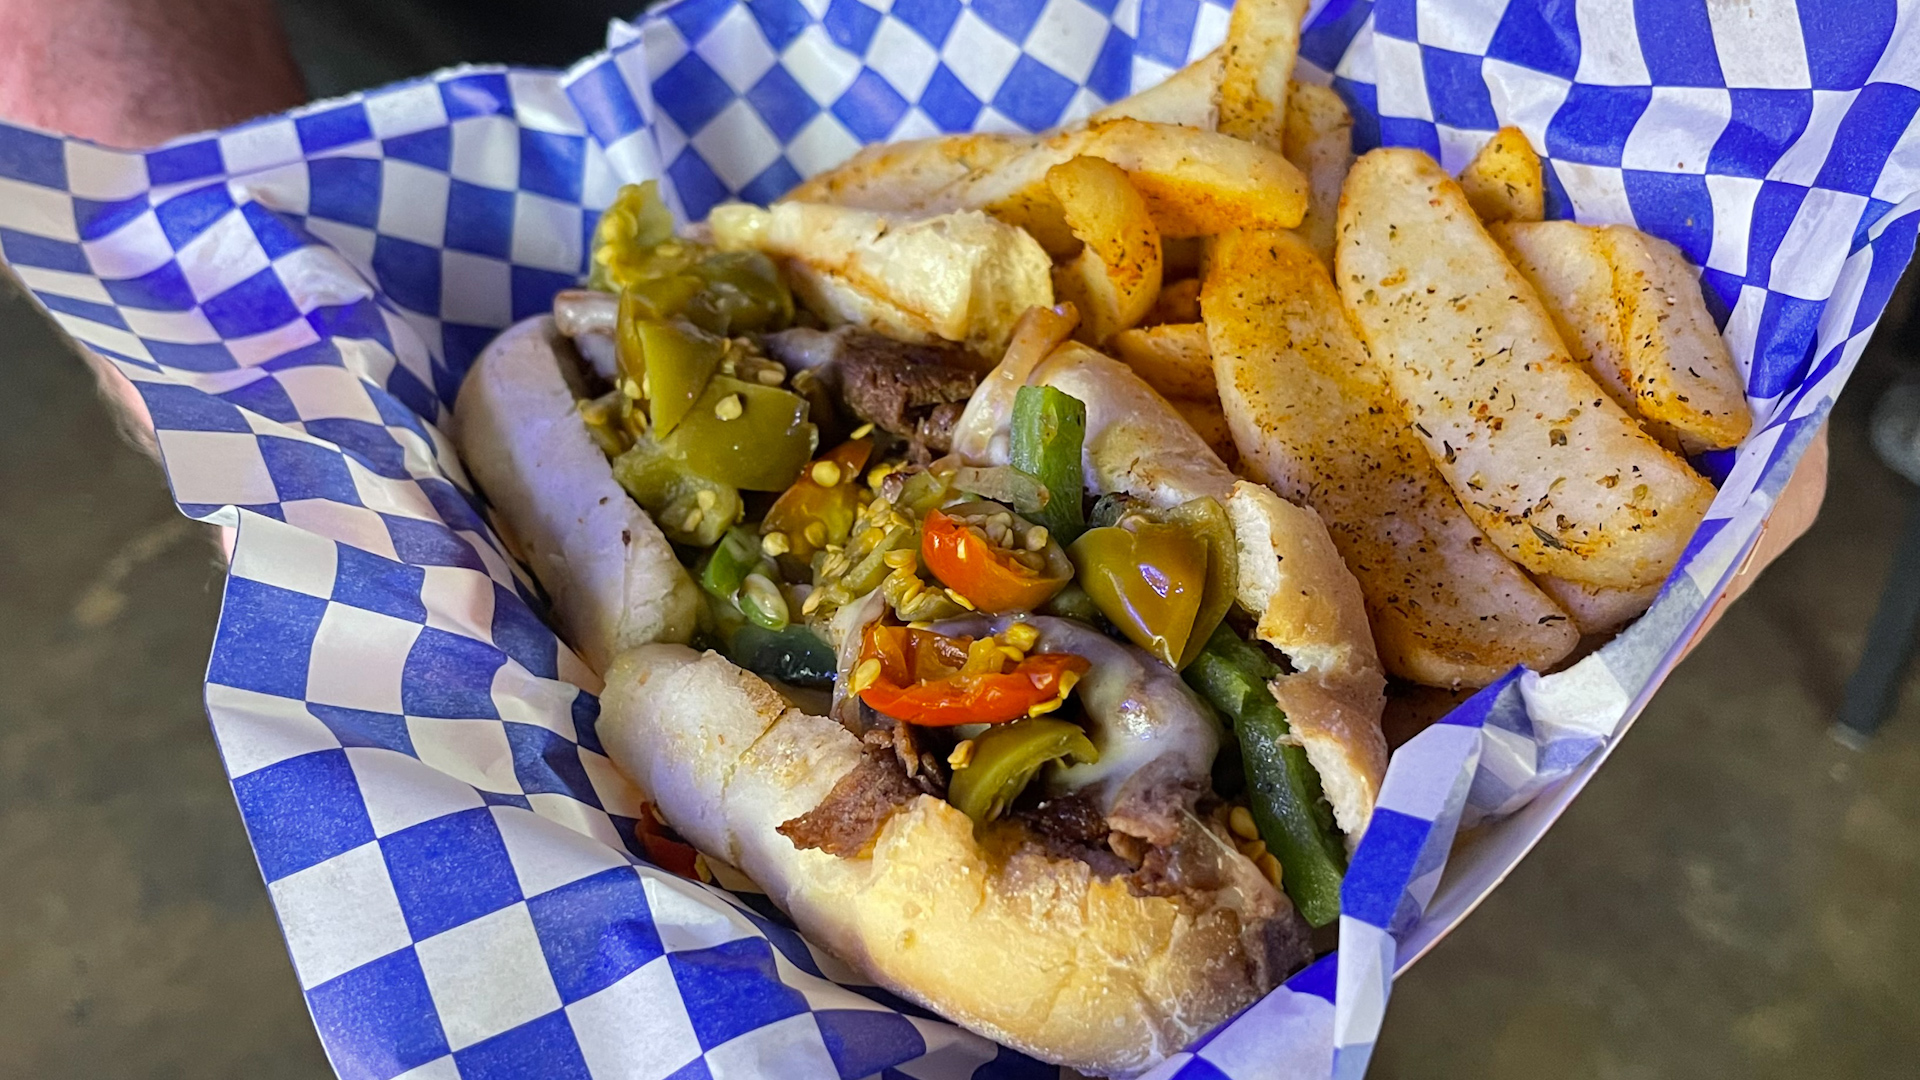 The French Quarter's newest sports pub takes a turn from po-boys to offer a Philly Cheesesteak sandwich featuring the super soft Amoroso roll flown in by the owners.